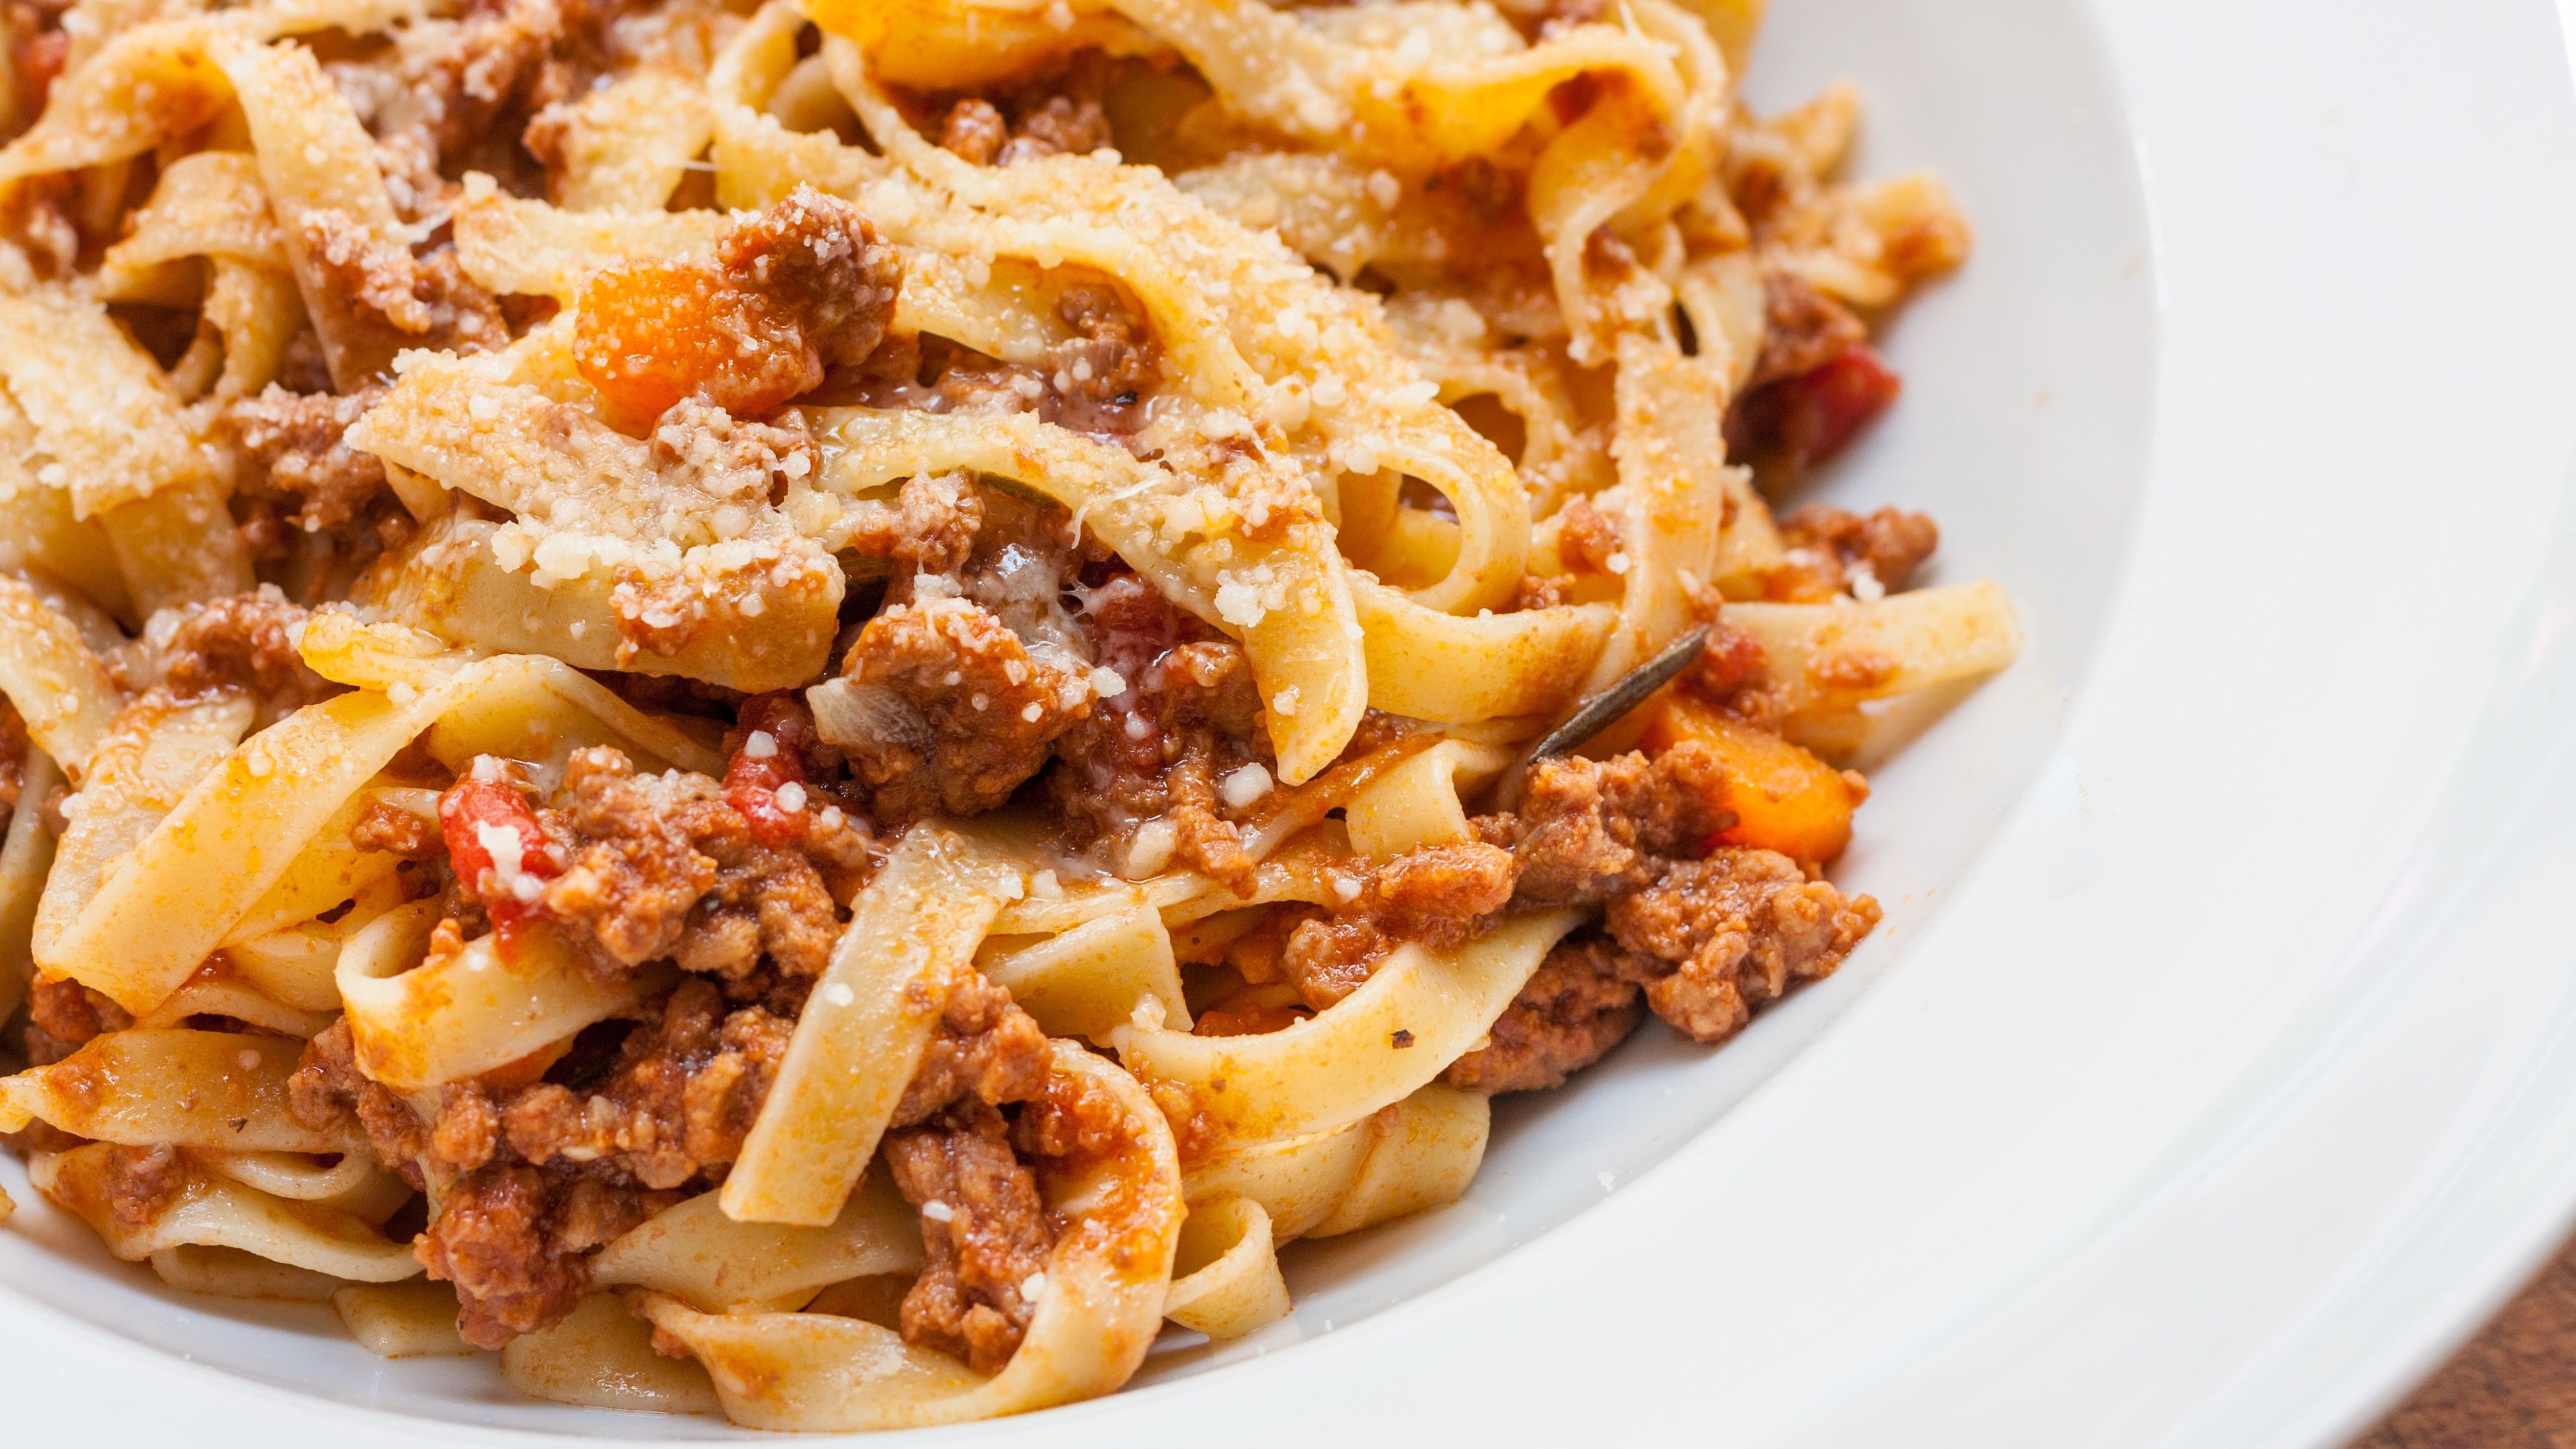 Italian food: Classic dishes everyone needs to try